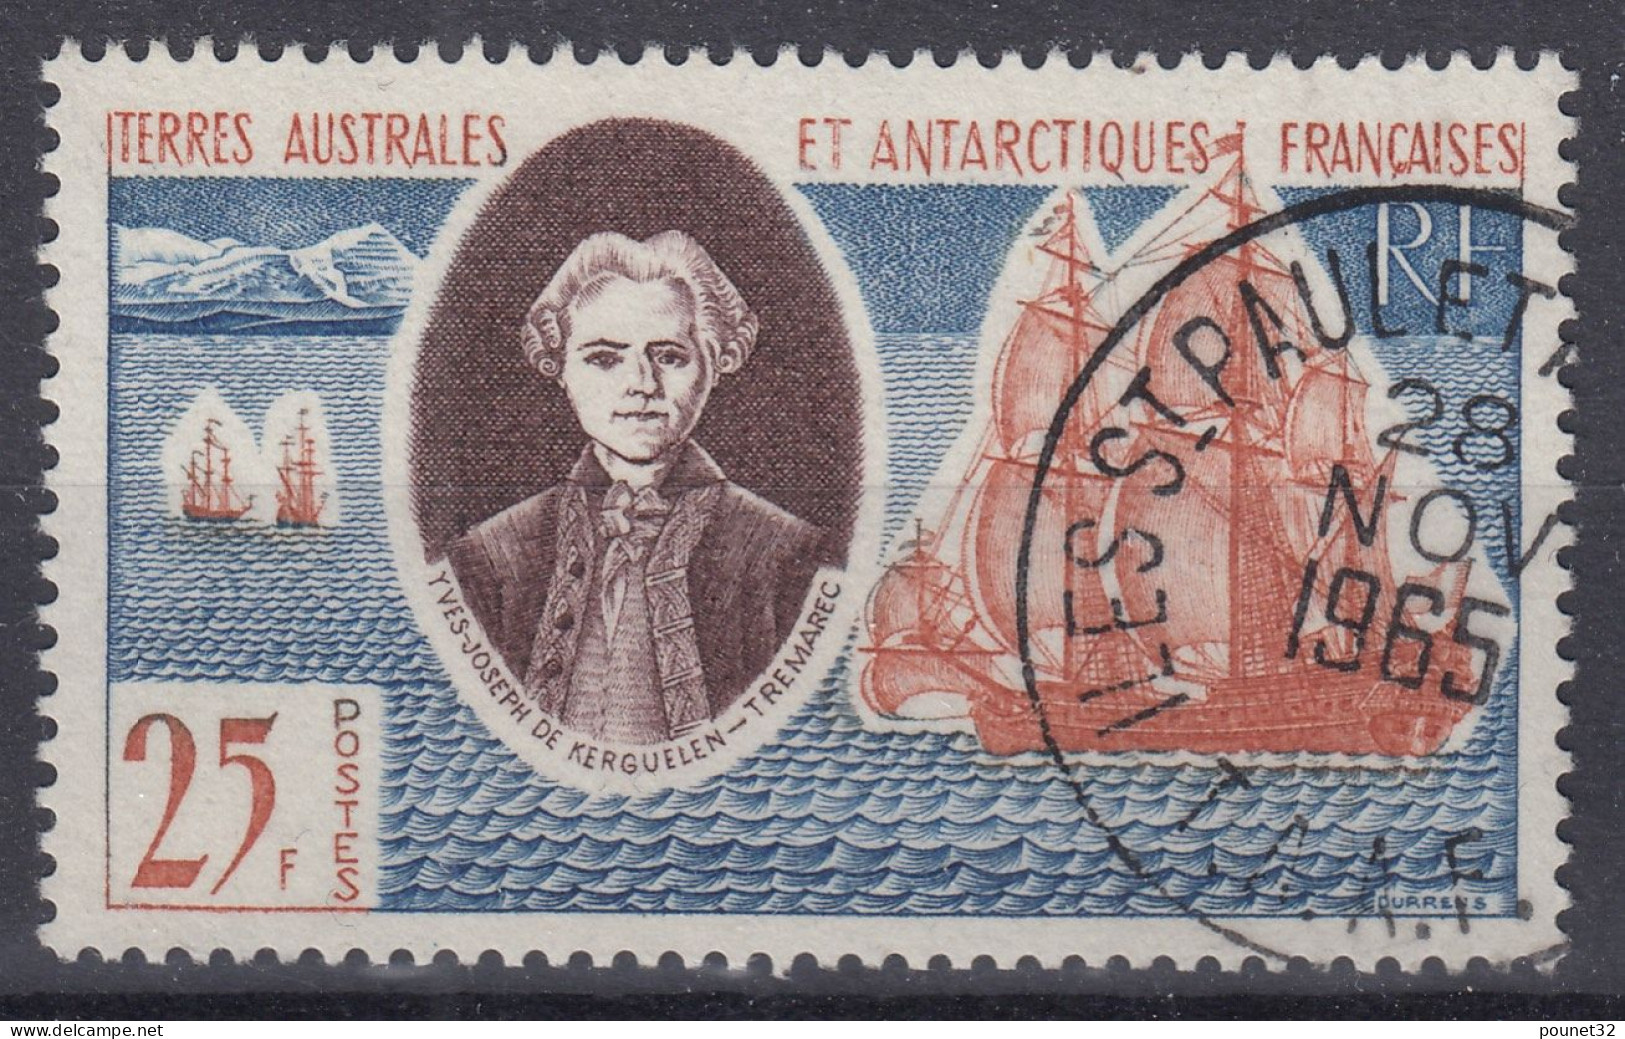 TIMBRE TAAF CHEVALIER DE KERGUELEN N° 18 OBLITERATION ILES ST PAUL ET AMSTERDAM - Used Stamps